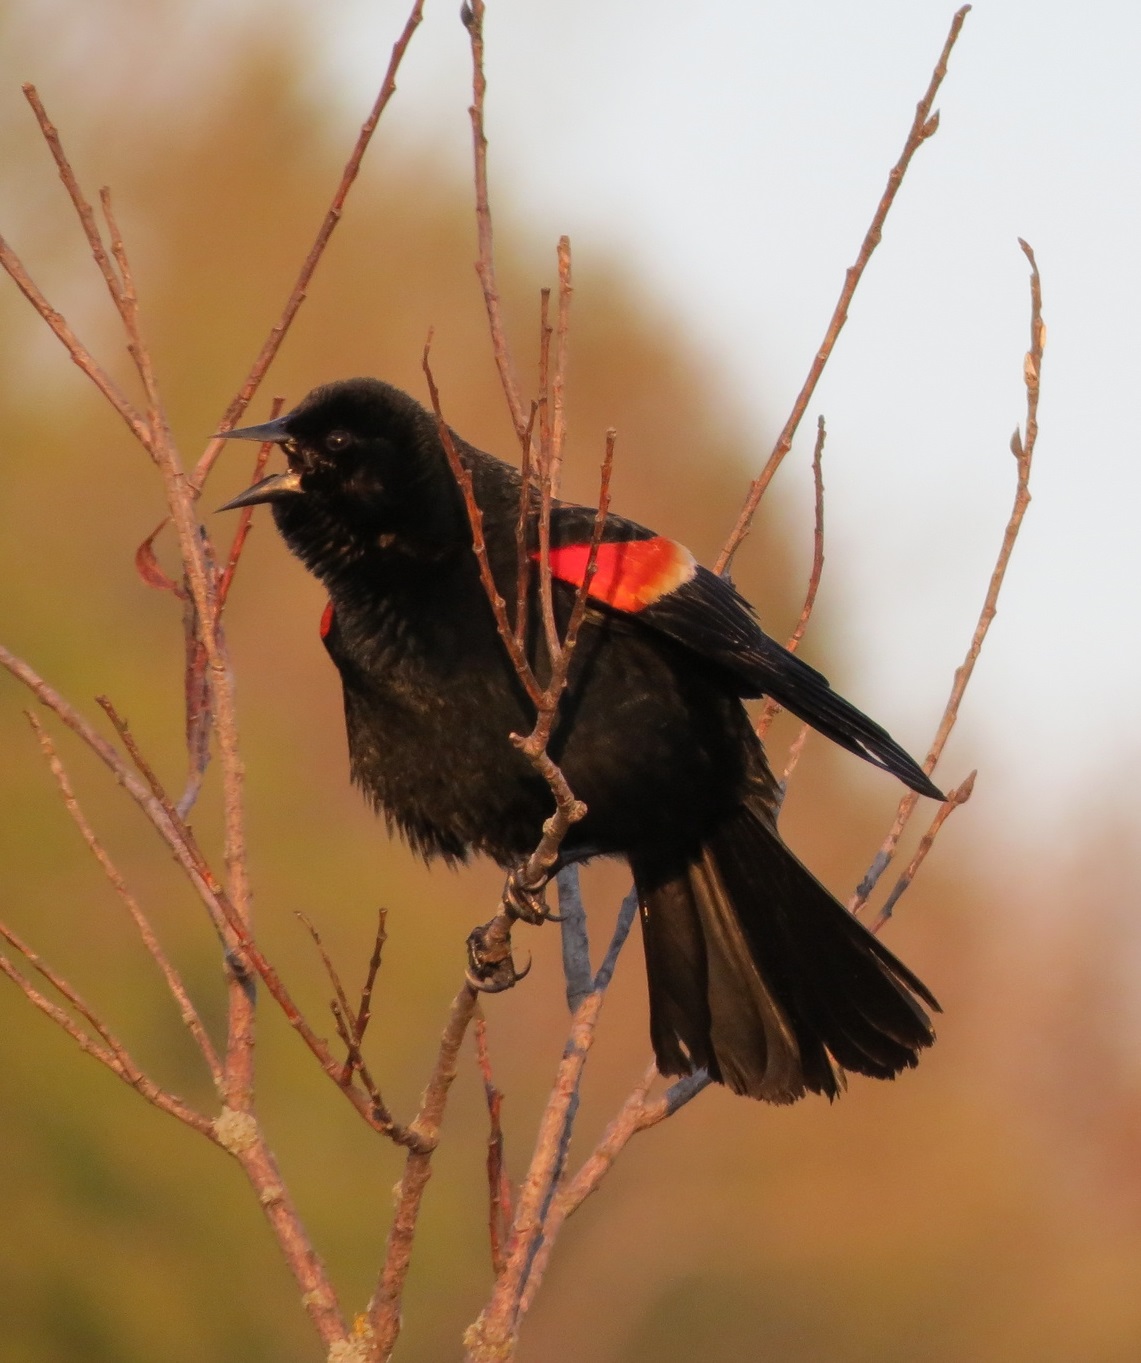 Male red-winged blackbird with its bill open, perched and signing. Its body is dark black and its shoulder has a patch of brilliant red.